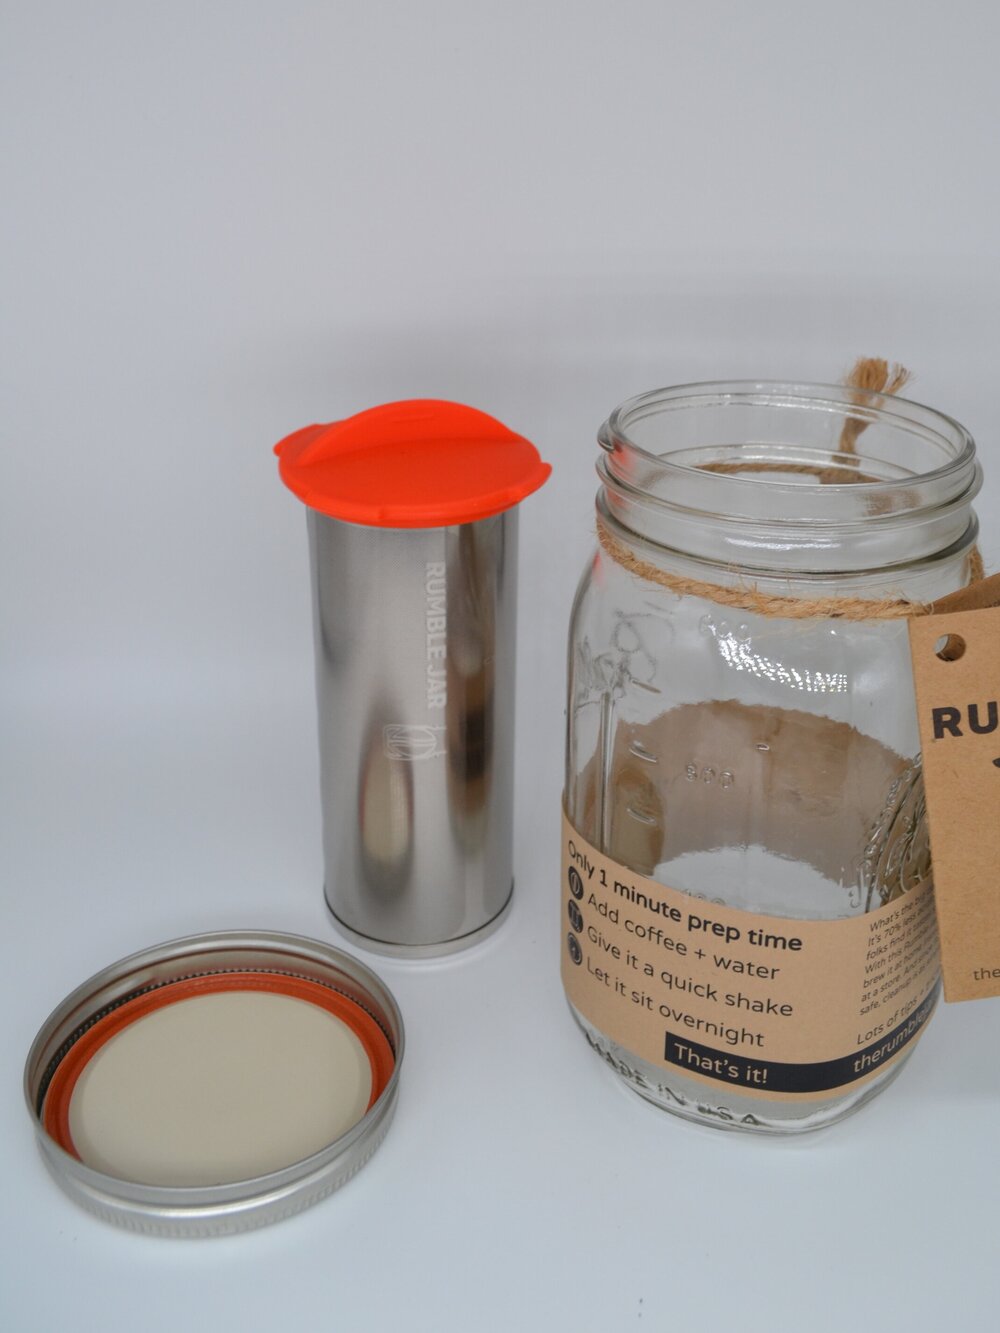 Rumble Jar Review - Cold Brew Coffee, the Easy Way 